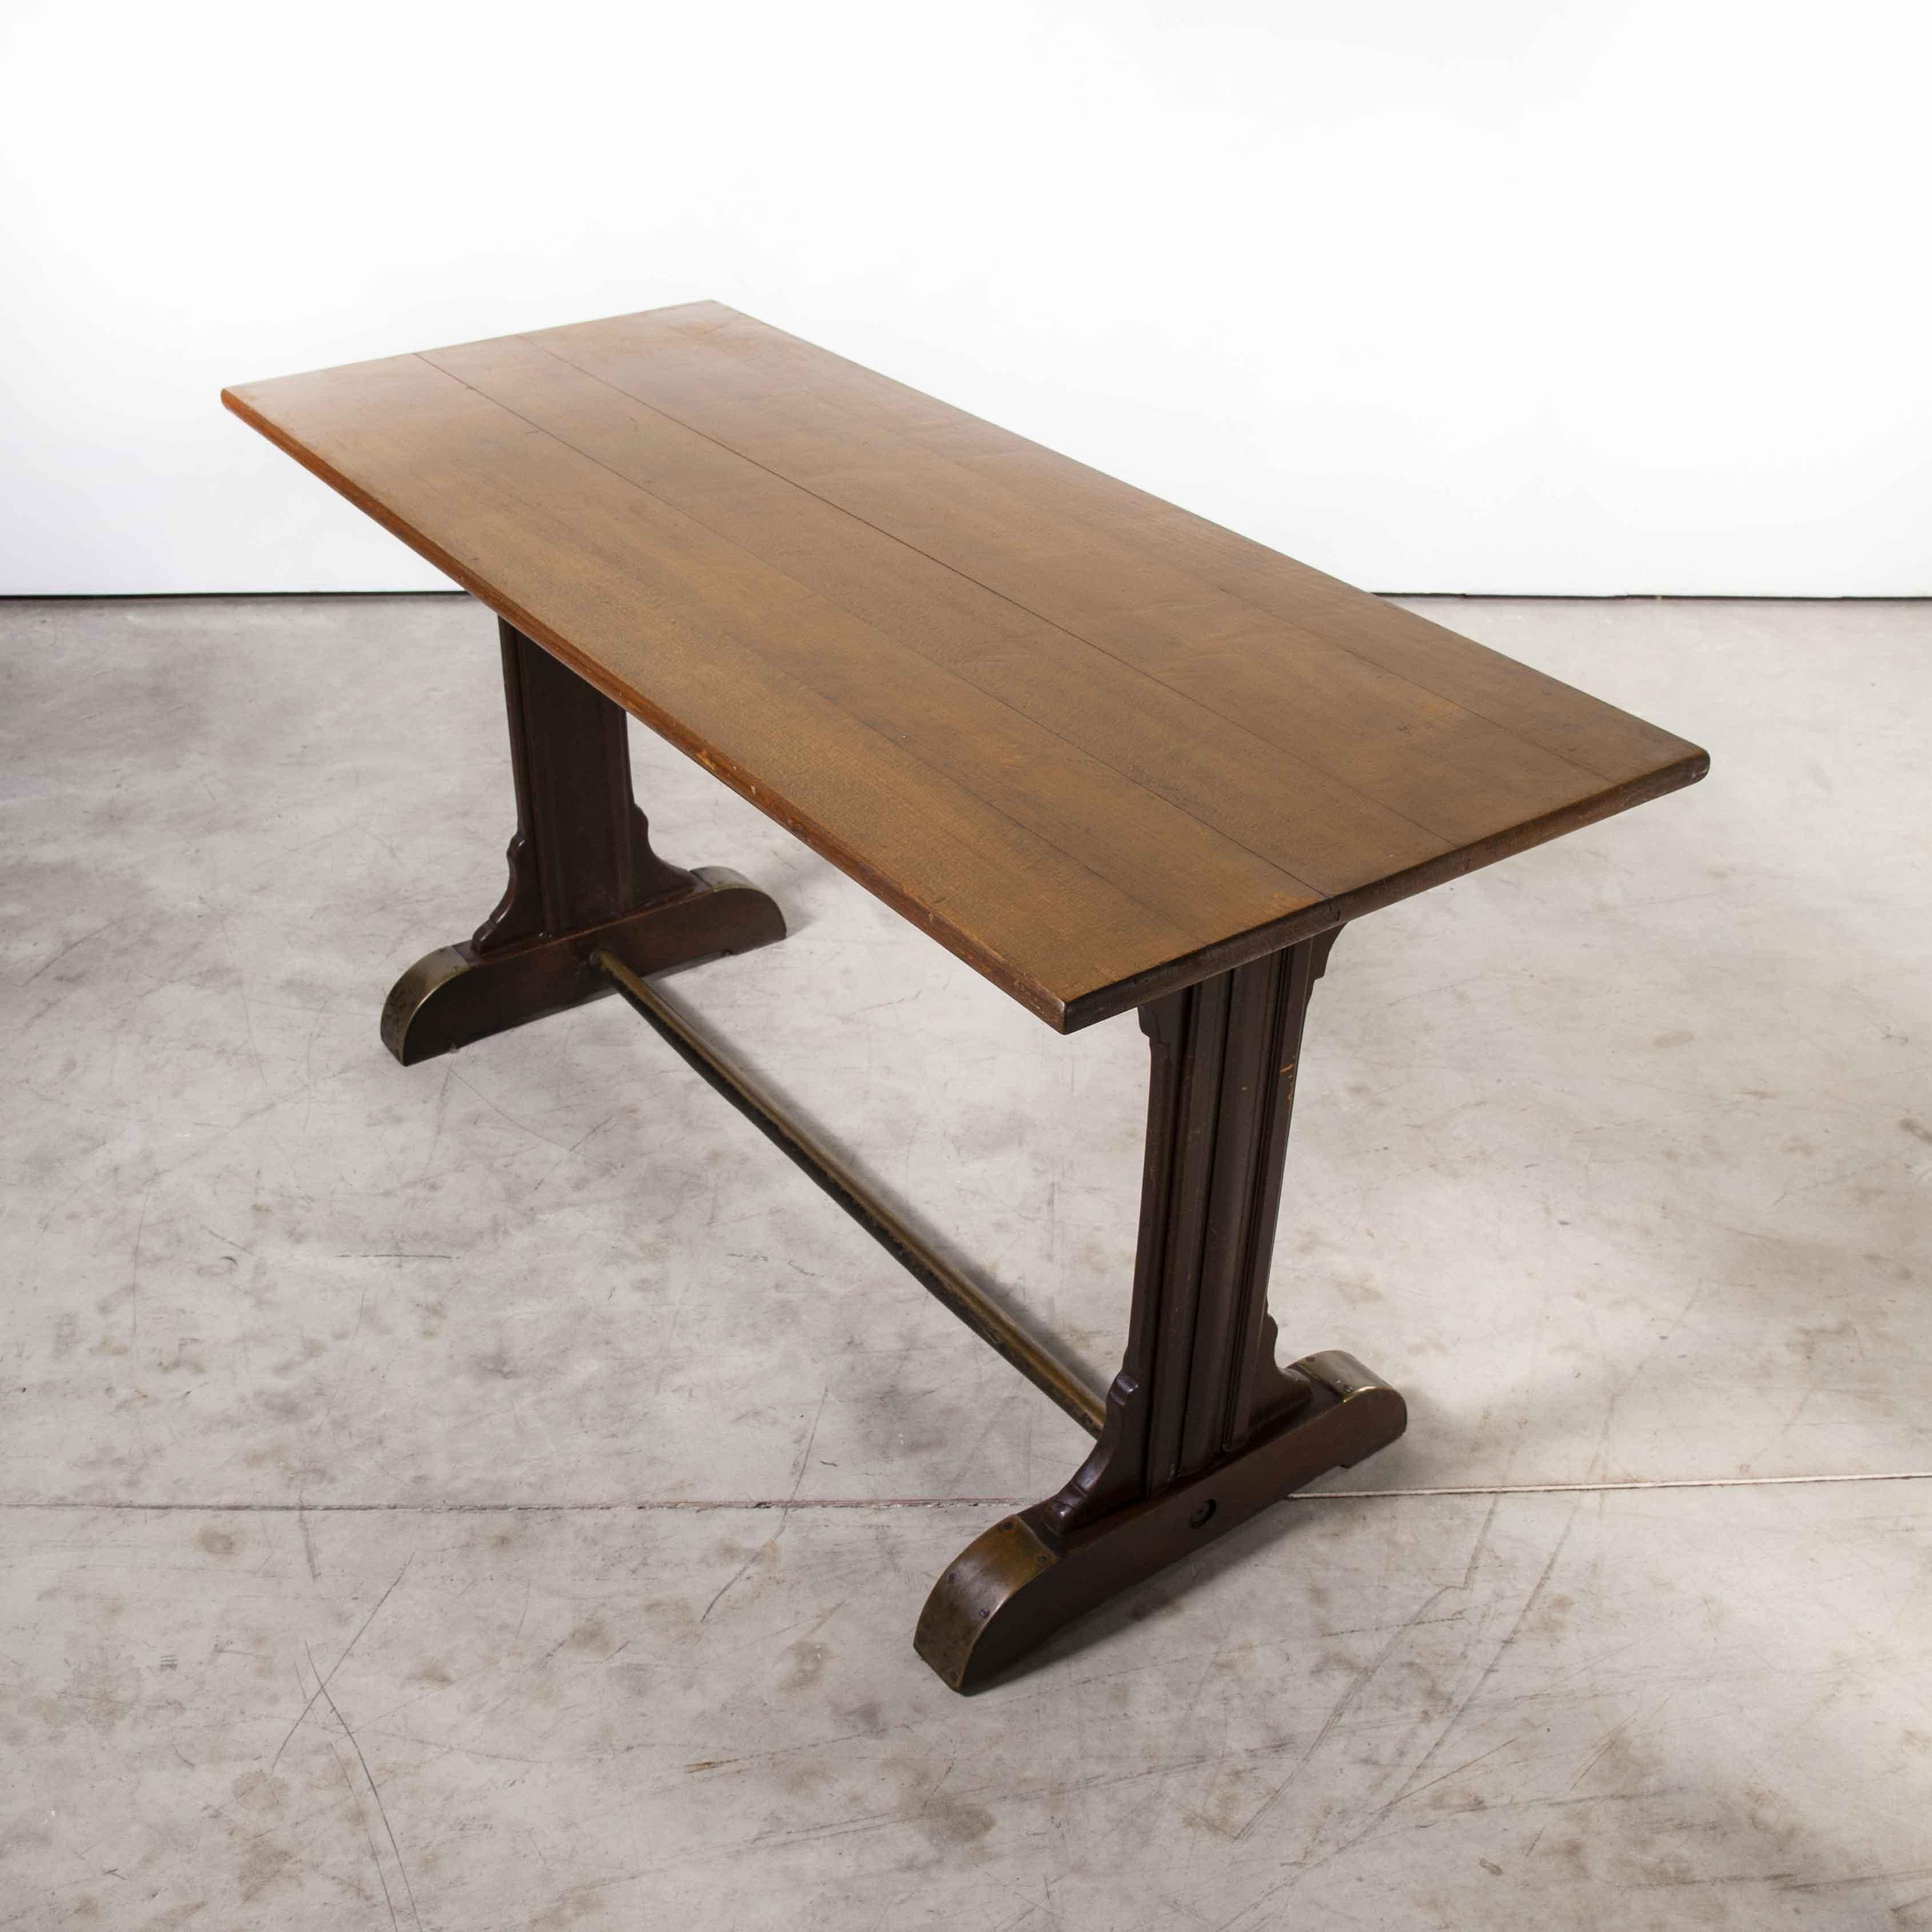 1930's Original French Café Table, Rectangular Dining Table 'Model 1114.1' For Sale 6